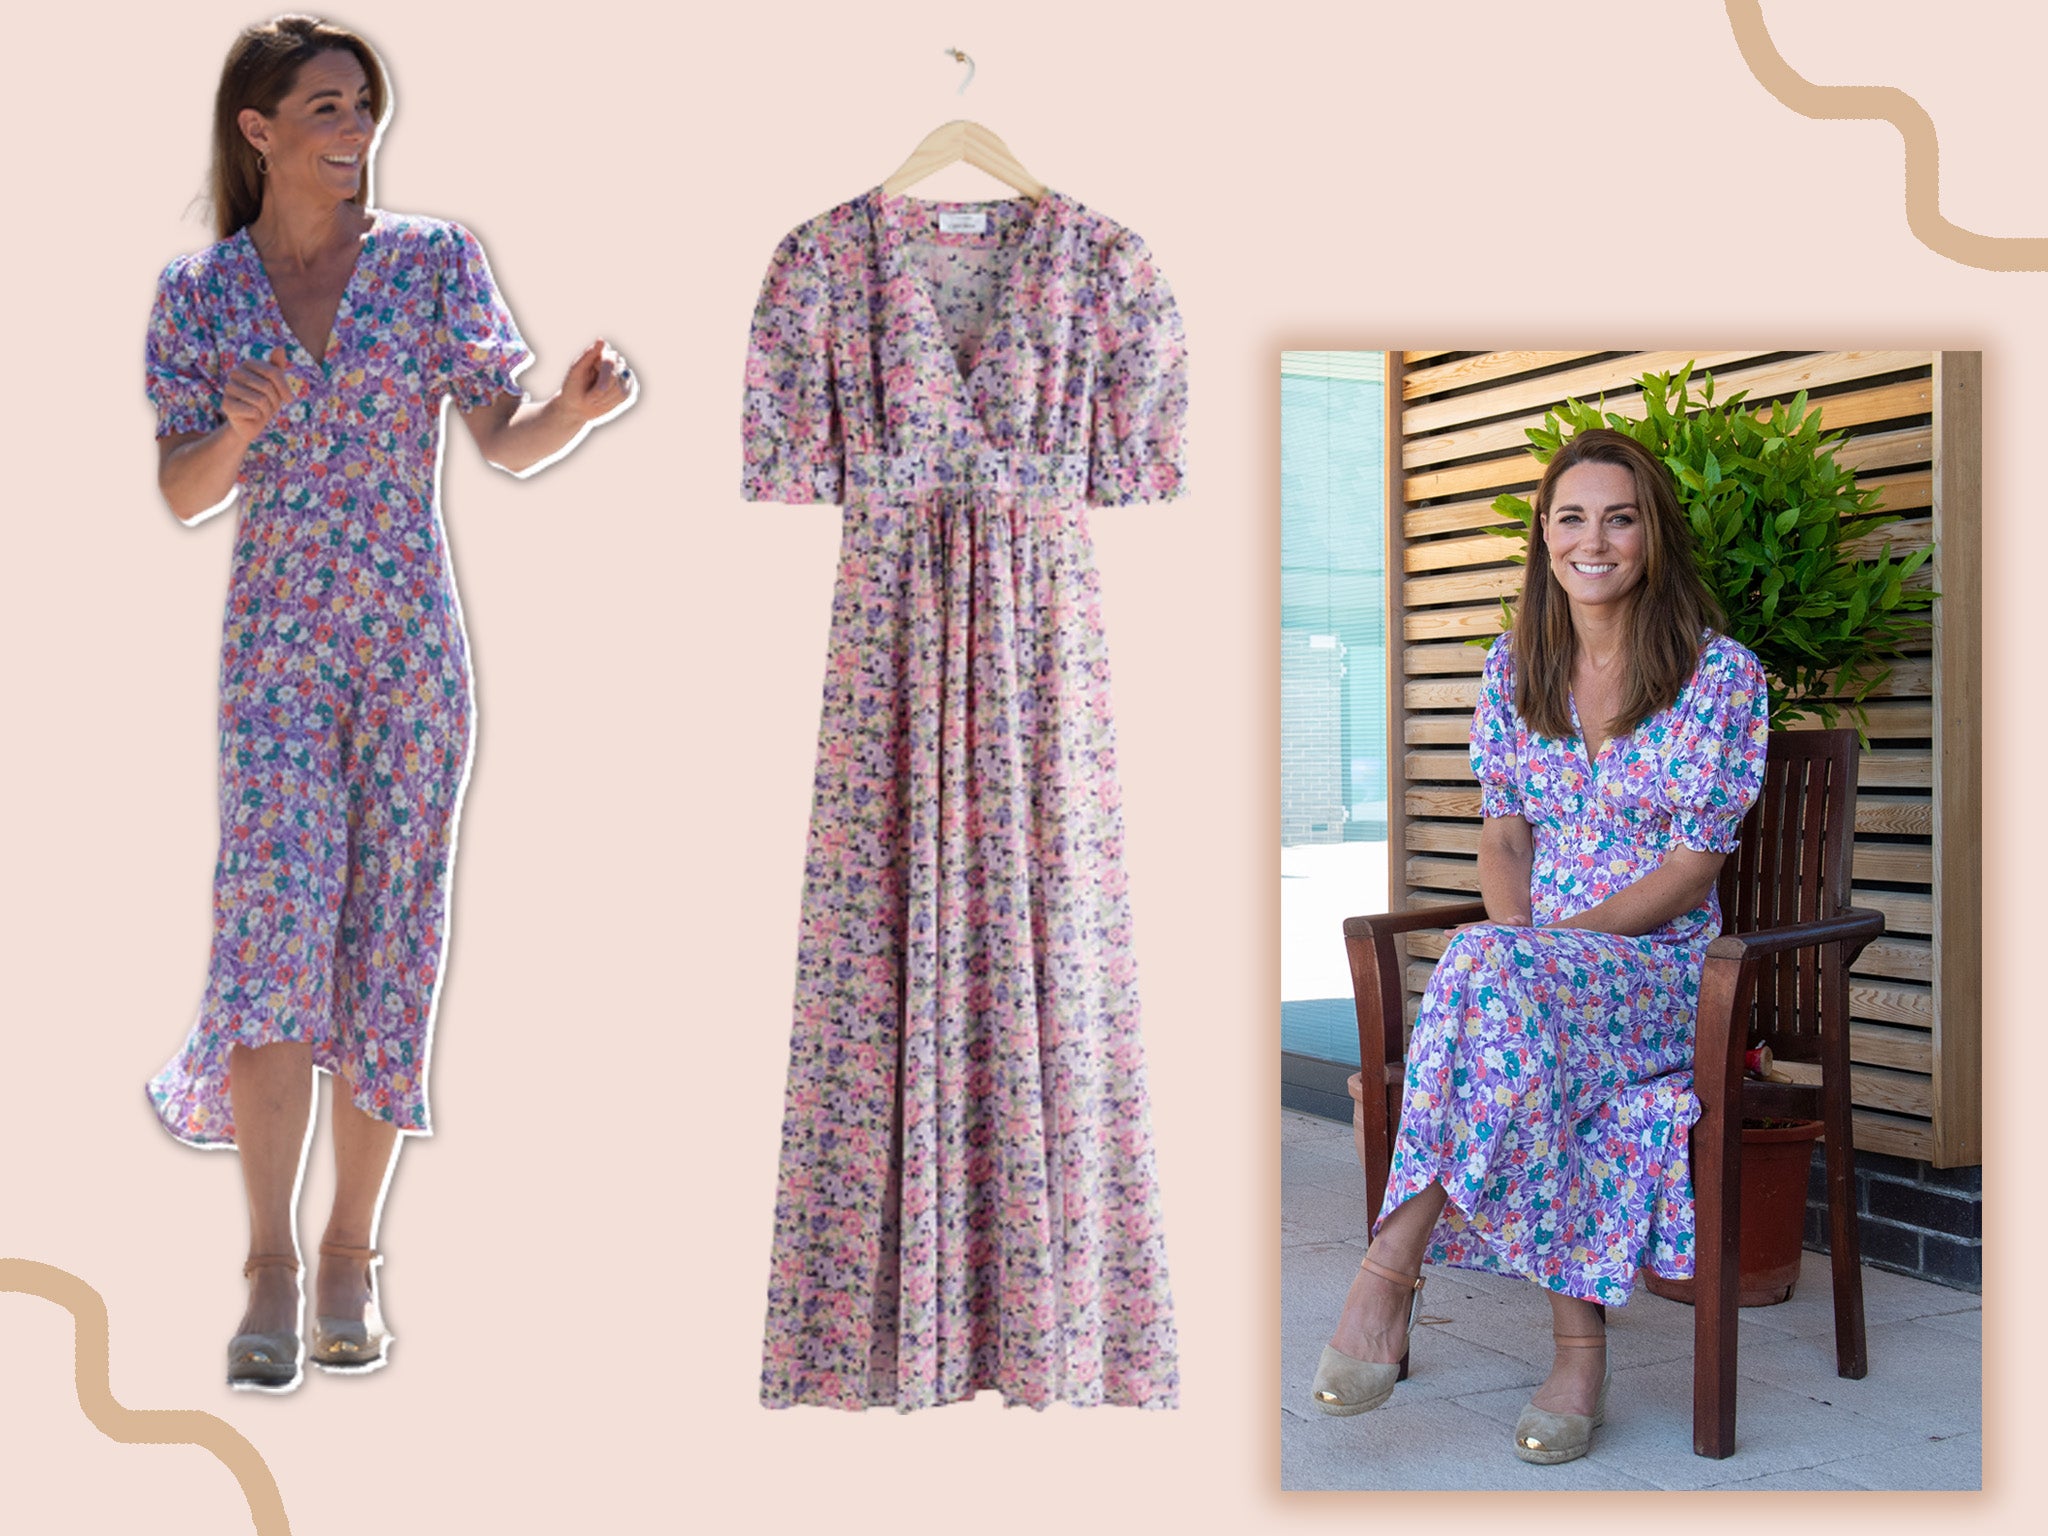 Copy the Duchess of Cambridge’s look (almost) with these bargain buys